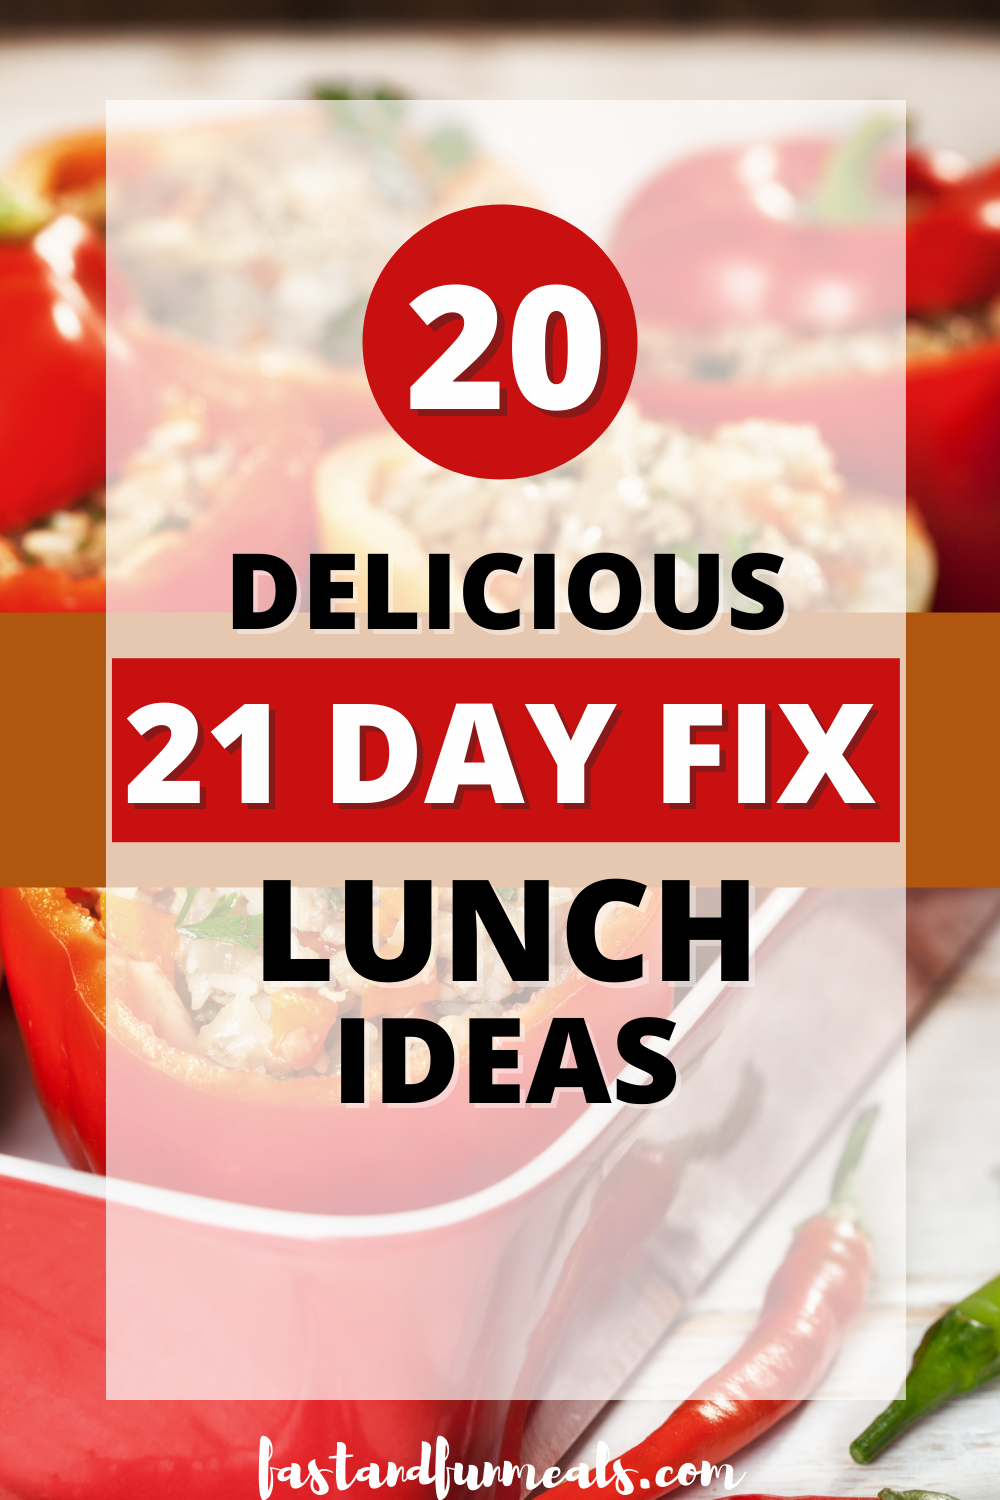 Pin showing the title 20 Delicious 21 Day Fix Lunch Ideas